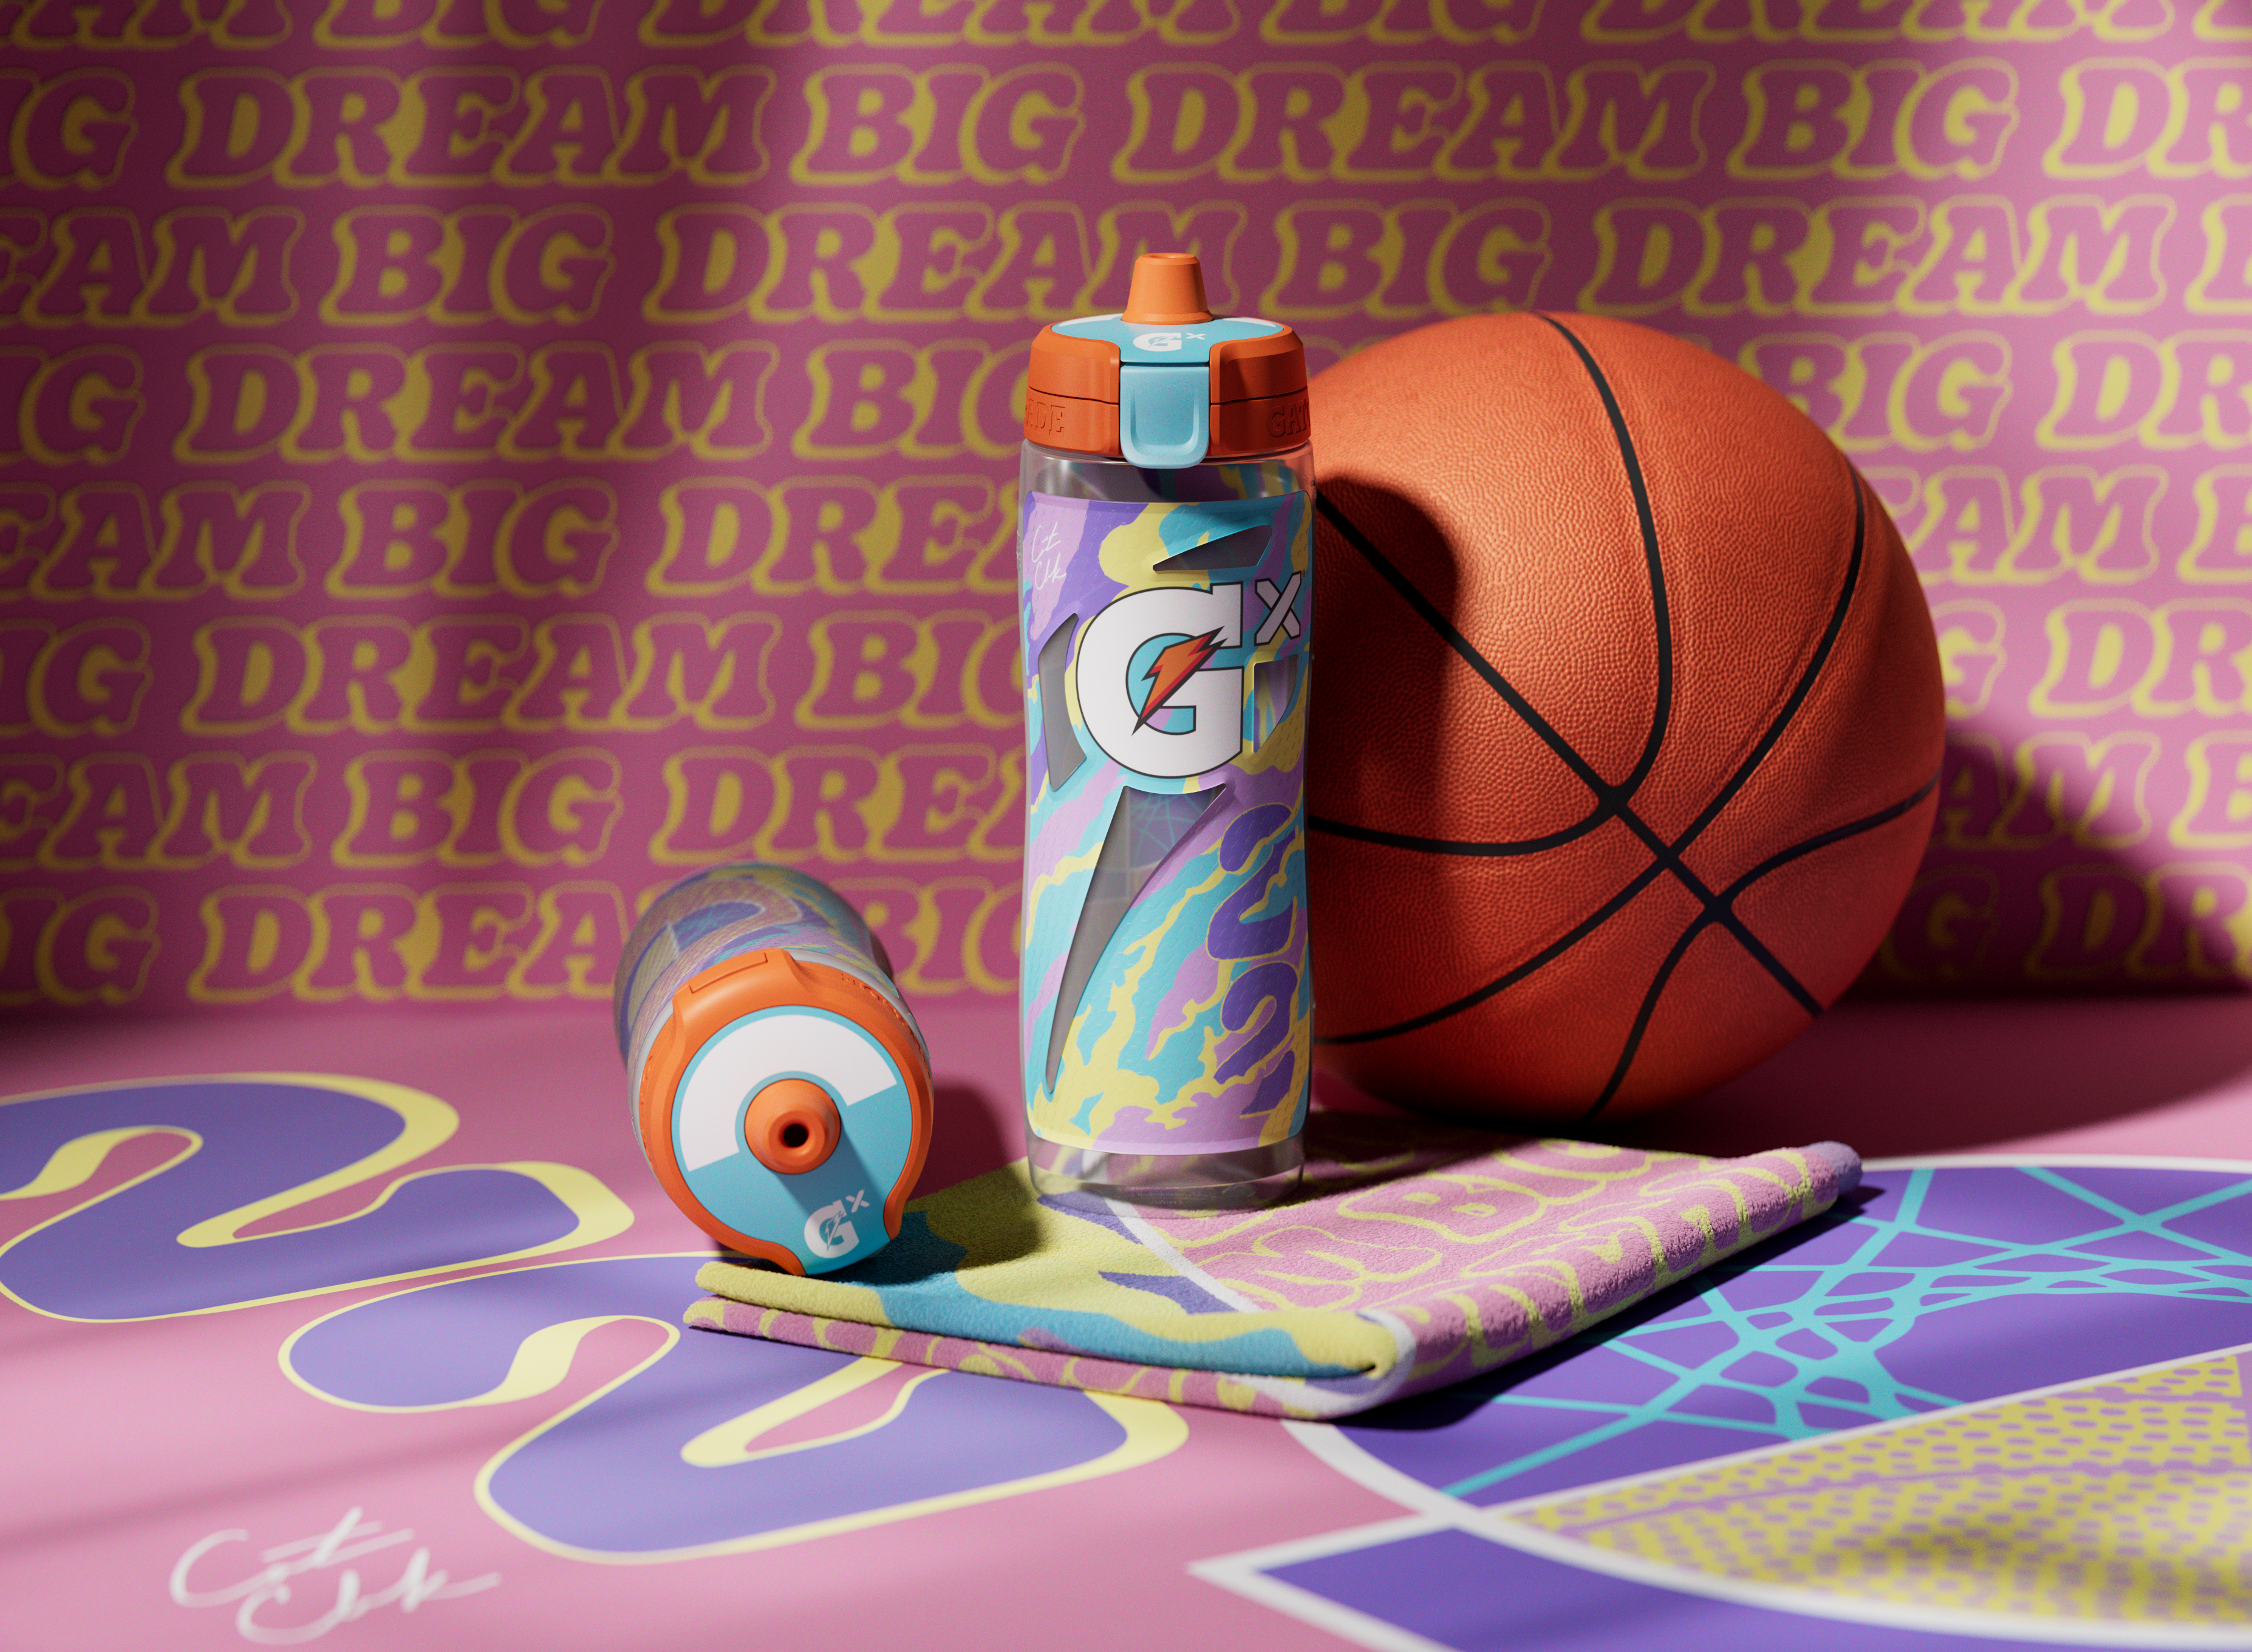 Caitlin Clark bottle and towel on basketball court with basketball